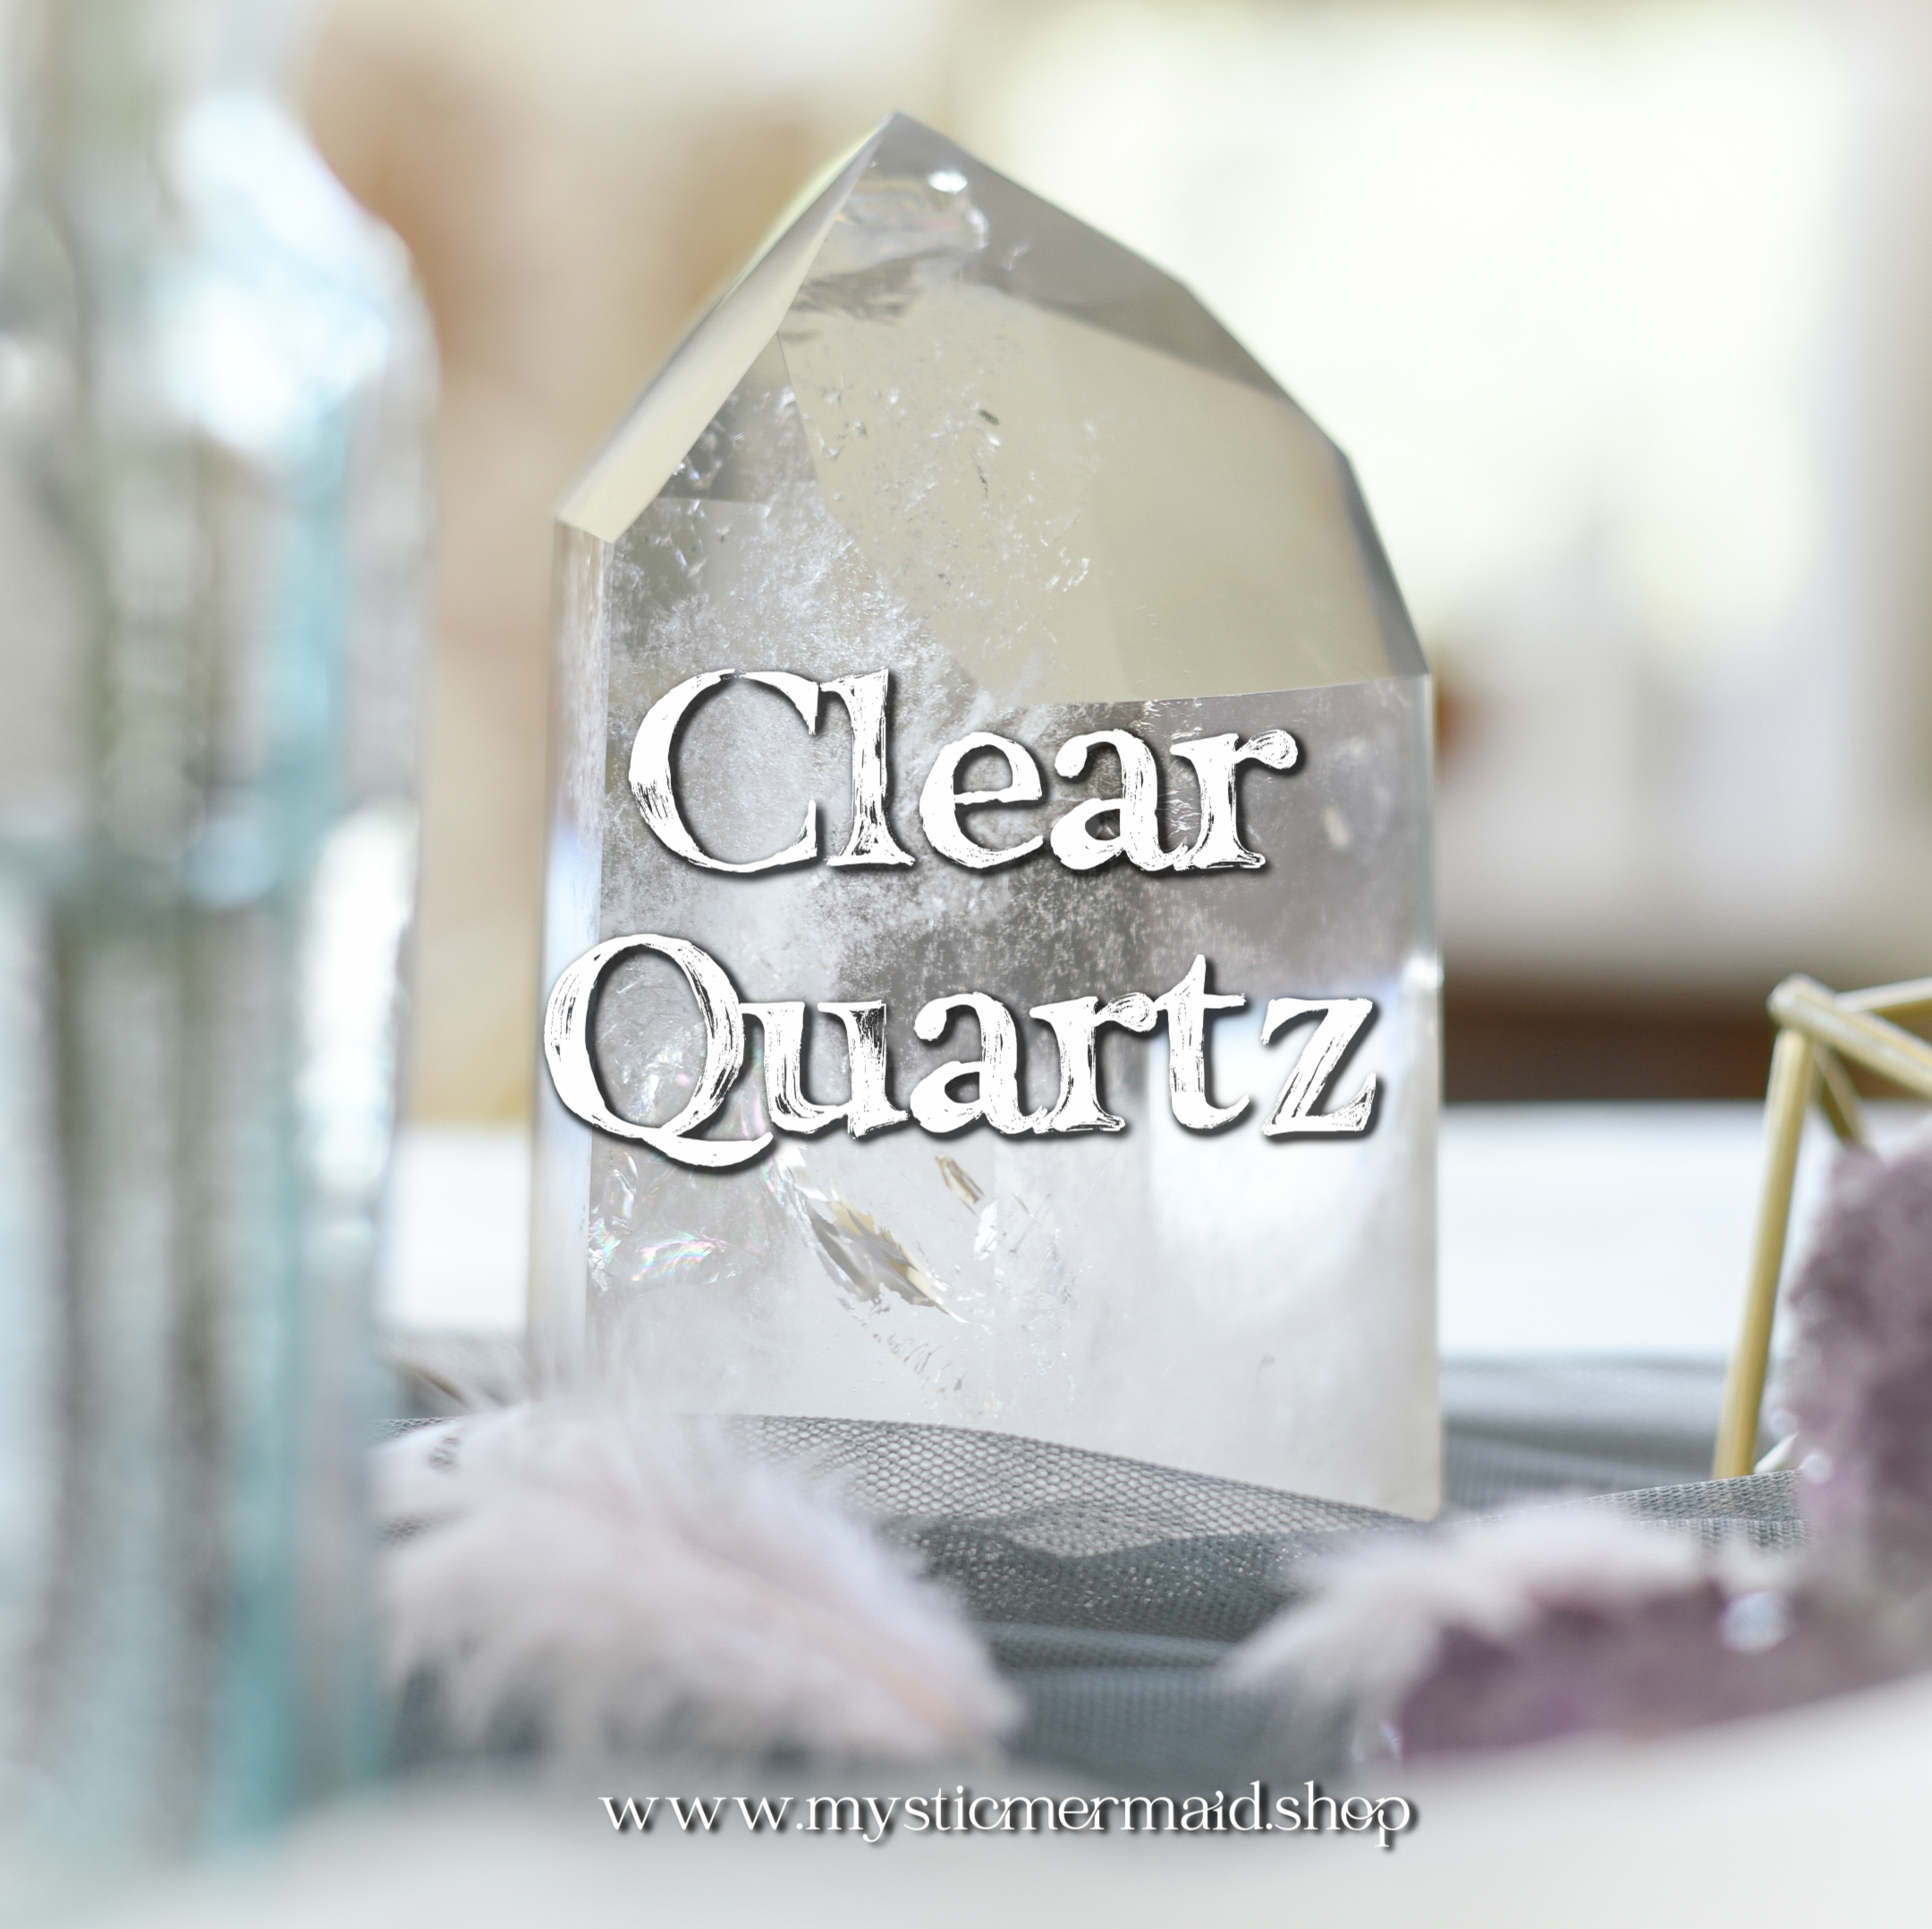 Clear Quartz available from Mystic Mermaid